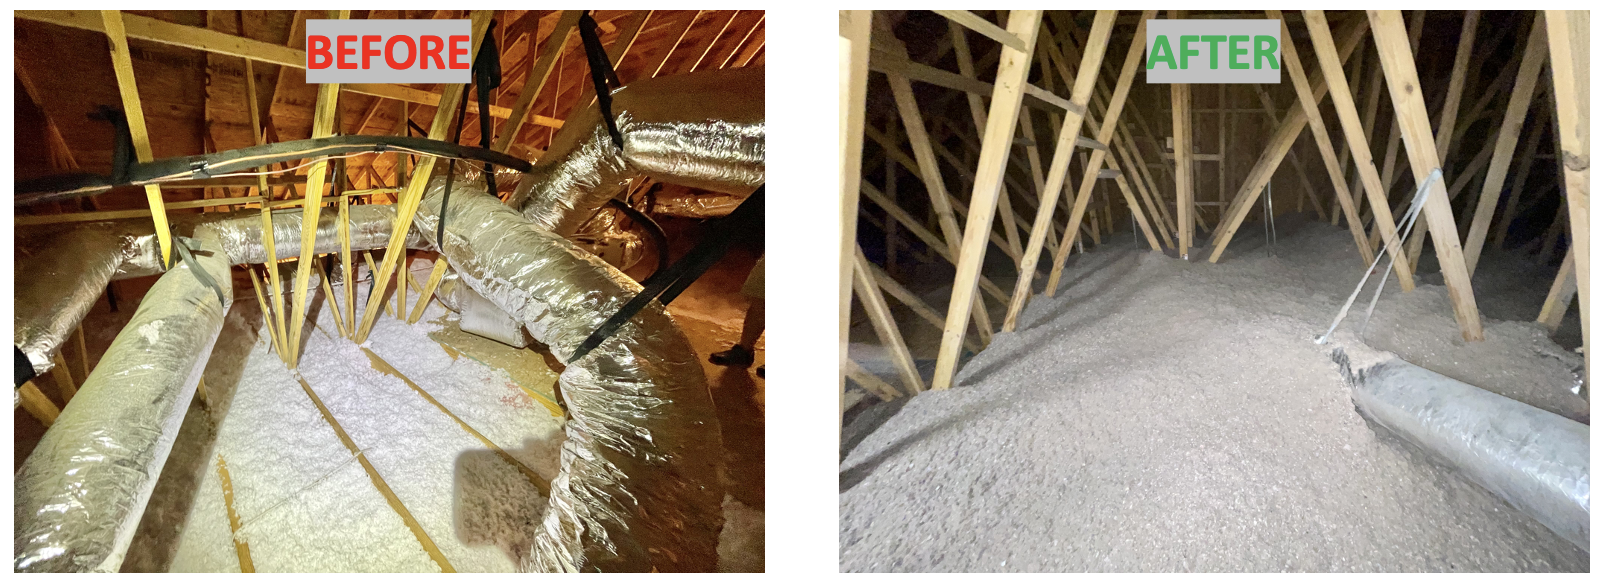 Attic, before and after